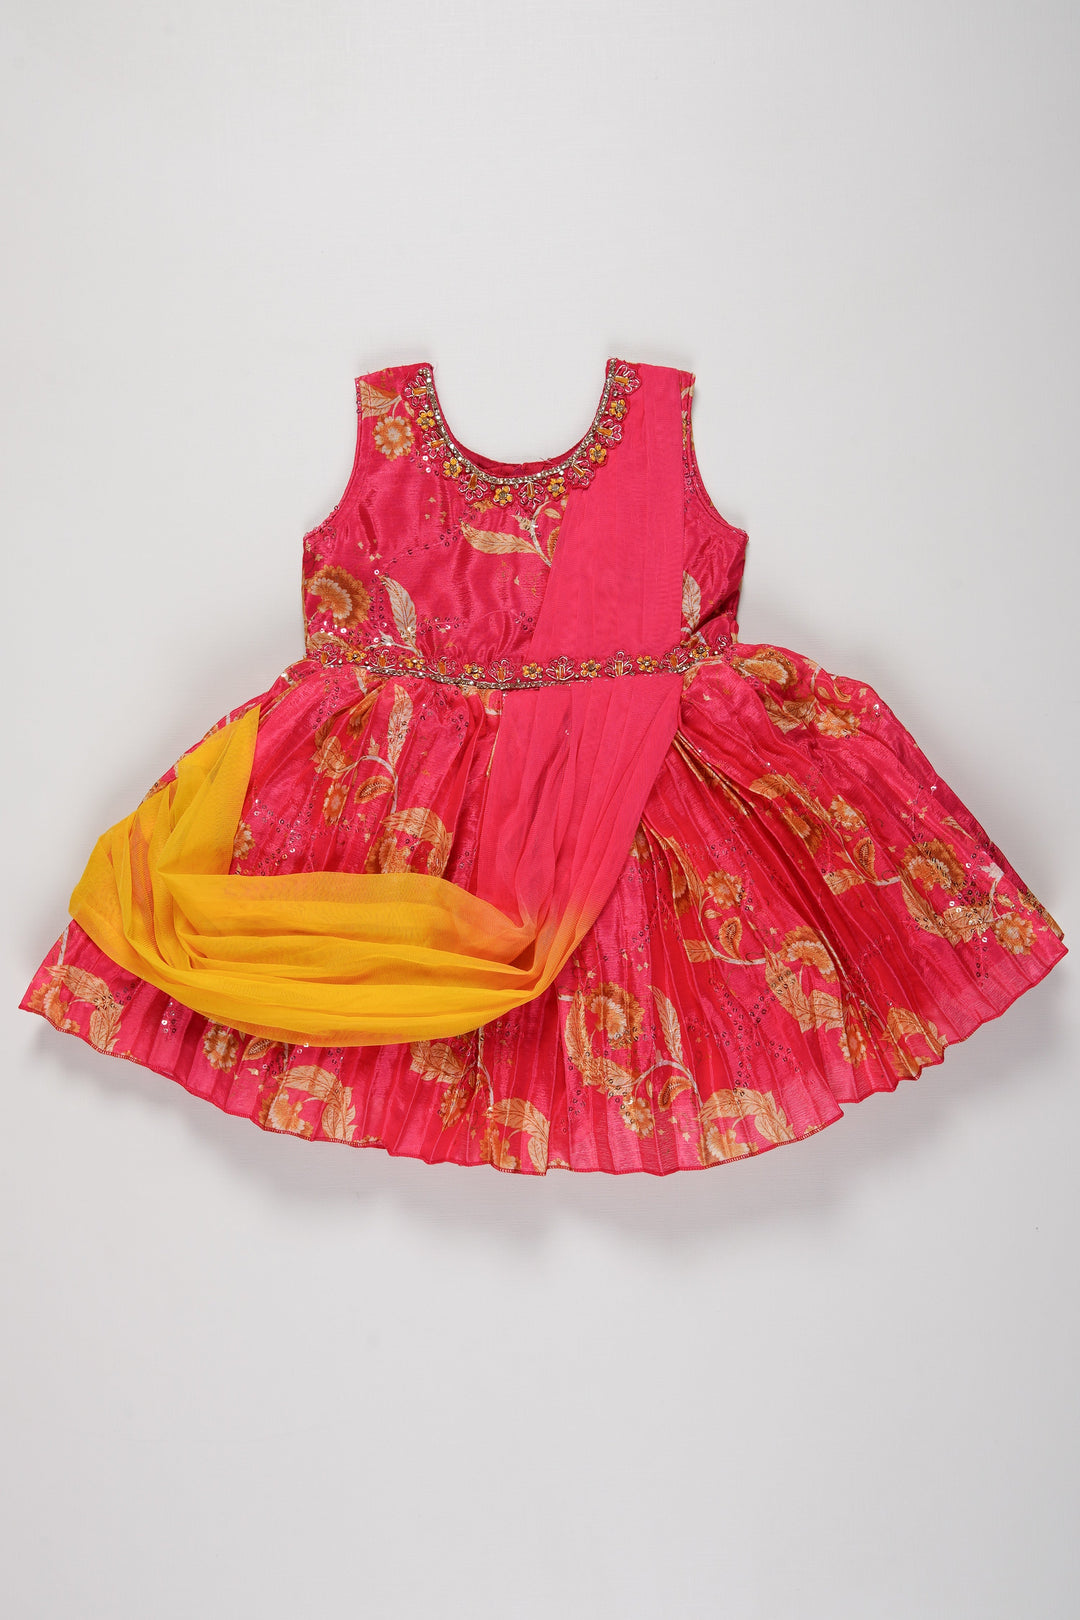 The Nesavu Silk Party Frock Girls Vibrant Pink and Yellow Silk Frock with Floral Embroidery Nesavu 18 (2Y) / Pink / Chinnon SF766A-18 Buy Girls Pink Floral Silk Frock Online | Vibrant Party Wear for Girls | The Nesavu